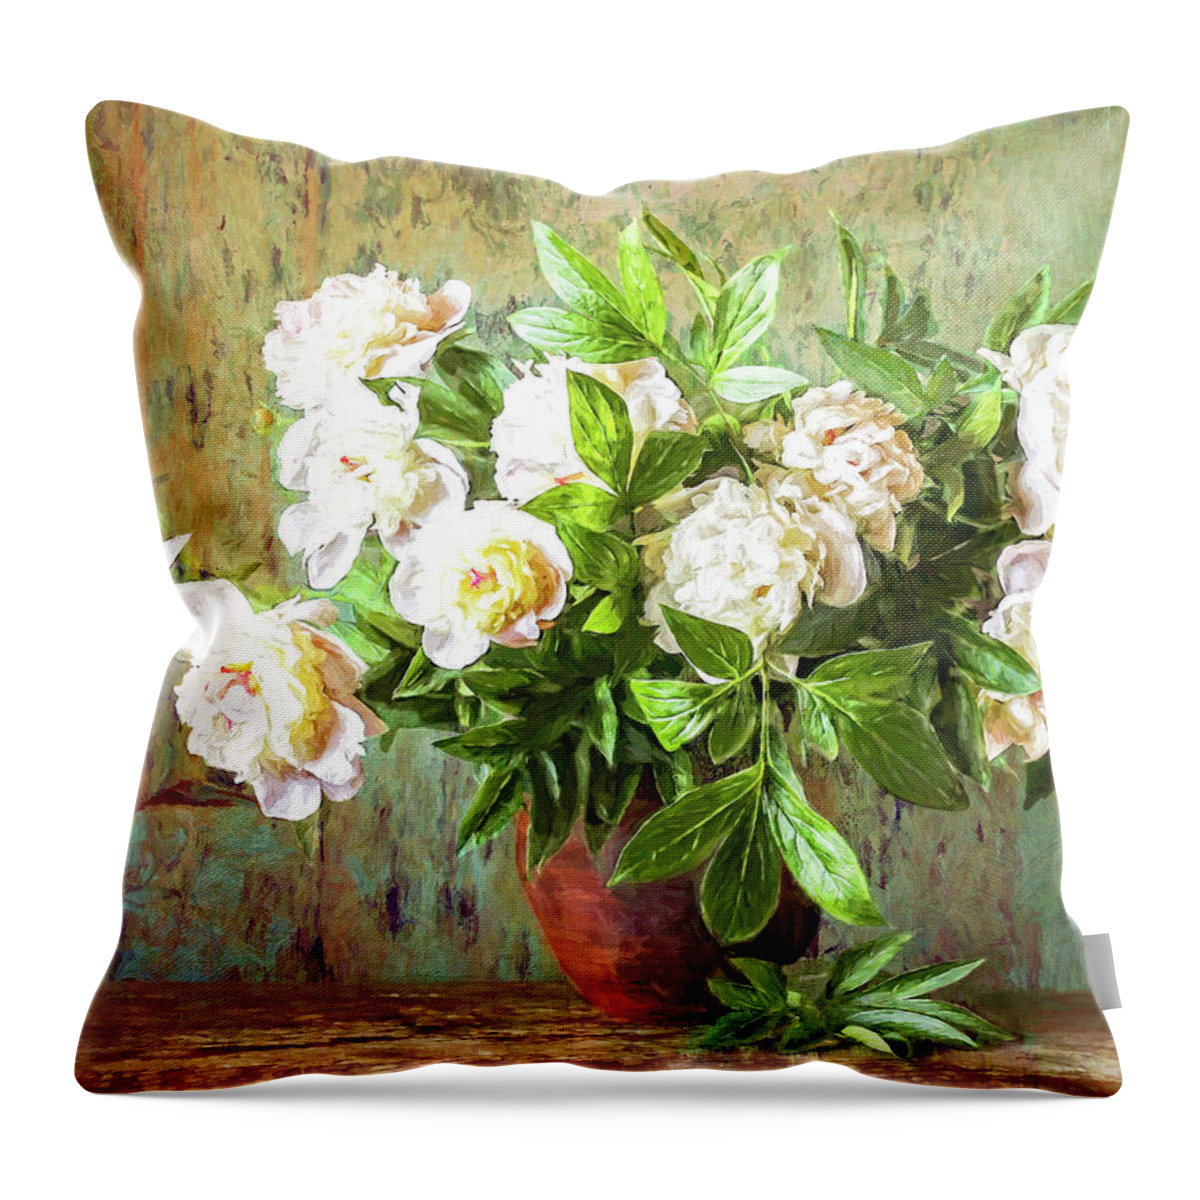 Peonies Throw Pillow featuring the digital art Peonies In a Vase by Sandra Selle Rodriguez